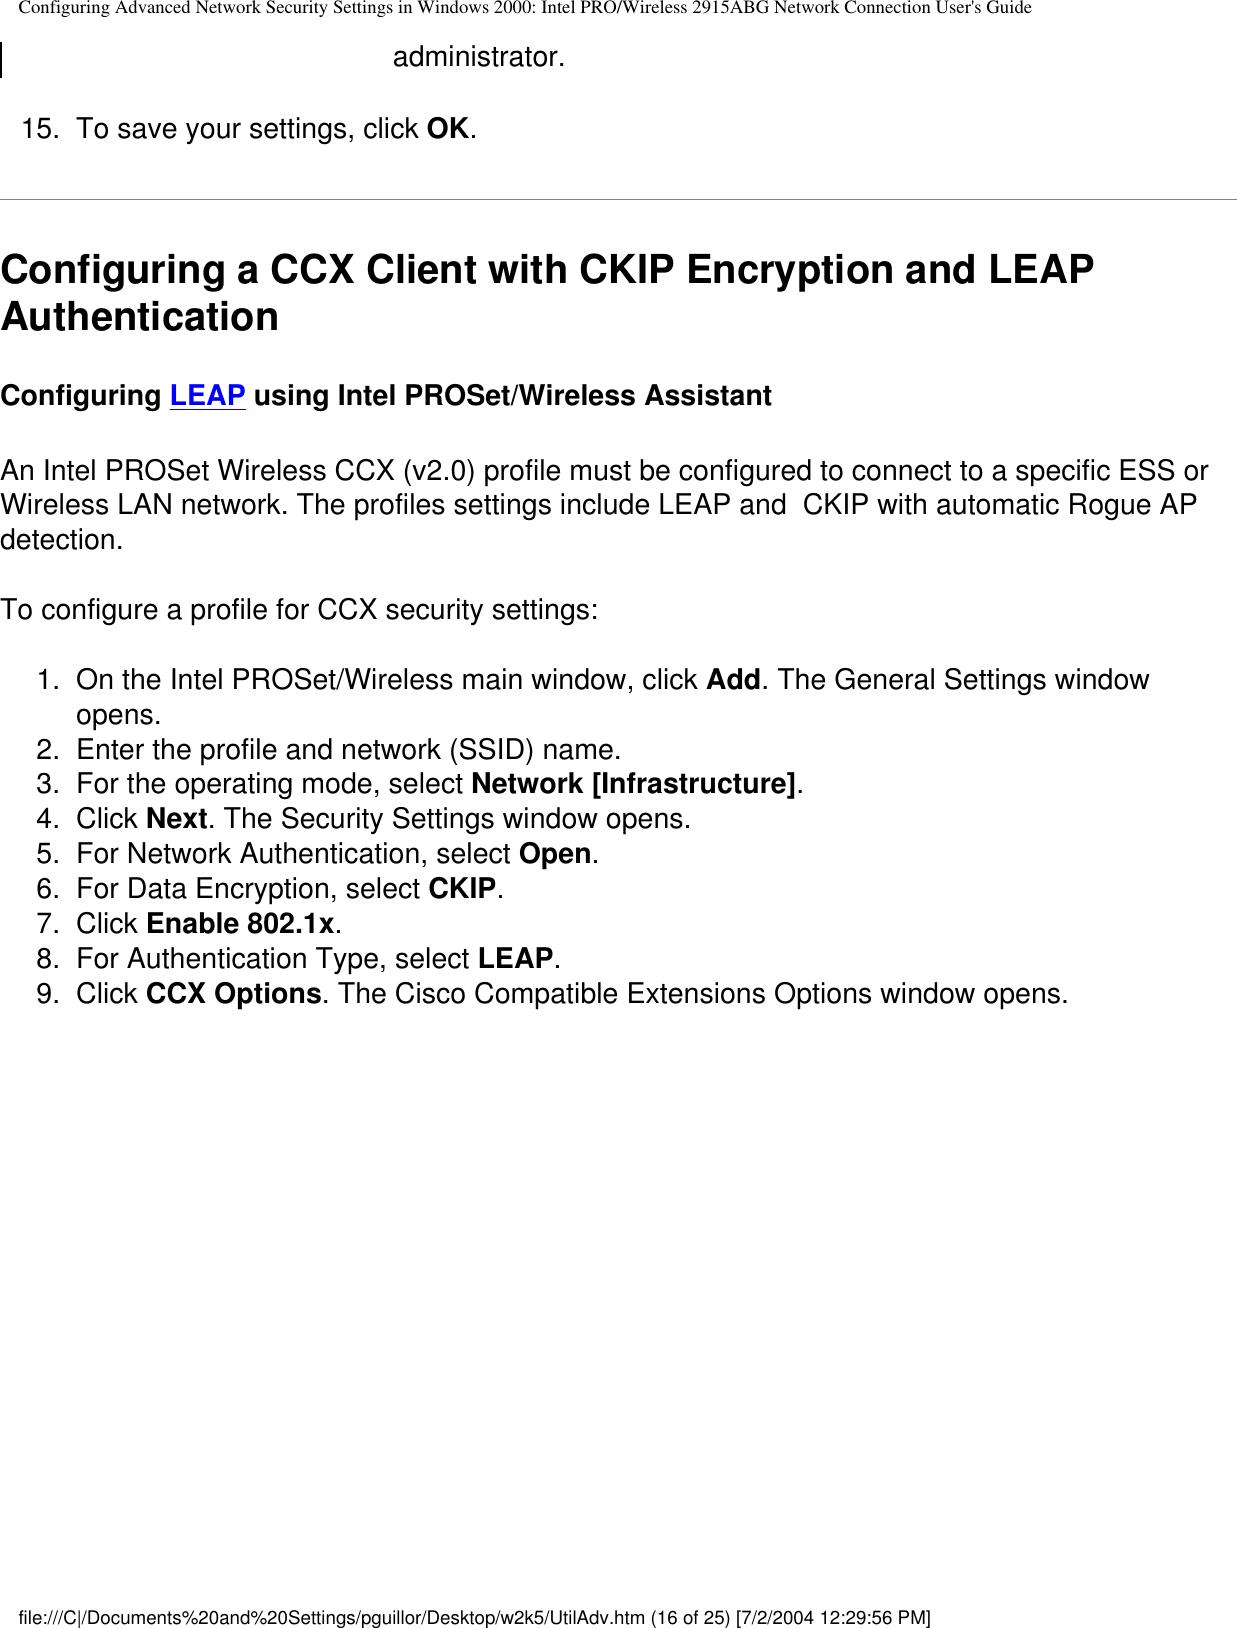 Configuring Advanced Network Security Settings in Windows 2000: Intel PRO/Wireless 2915ABG Network Connection User&apos;s Guideadministrator.15.  To save your settings, click OK.Configuring a CCX Client with CKIP Encryption and LEAP Authentication Configuring LEAP using Intel PROSet/Wireless AssistantAn Intel PROSet Wireless CCX (v2.0) profile must be configured to connect to a specific ESS or Wireless LAN network. The profiles settings include LEAP and  CKIP with automatic Rogue AP detection. To configure a profile for CCX security settings:1.  On the Intel PROSet/Wireless main window, click Add. The General Settings window opens.2.  Enter the profile and network (SSID) name. 3.  For the operating mode, select Network [Infrastructure]. 4.  Click Next. The Security Settings window opens.5.  For Network Authentication, select Open.6.  For Data Encryption, select CKIP.7.  Click Enable 802.1x.8.  For Authentication Type, select LEAP.9.  Click CCX Options. The Cisco Compatible Extensions Options window opens.file:///C|/Documents%20and%20Settings/pguillor/Desktop/w2k5/UtilAdv.htm (16 of 25) [7/2/2004 12:29:56 PM]